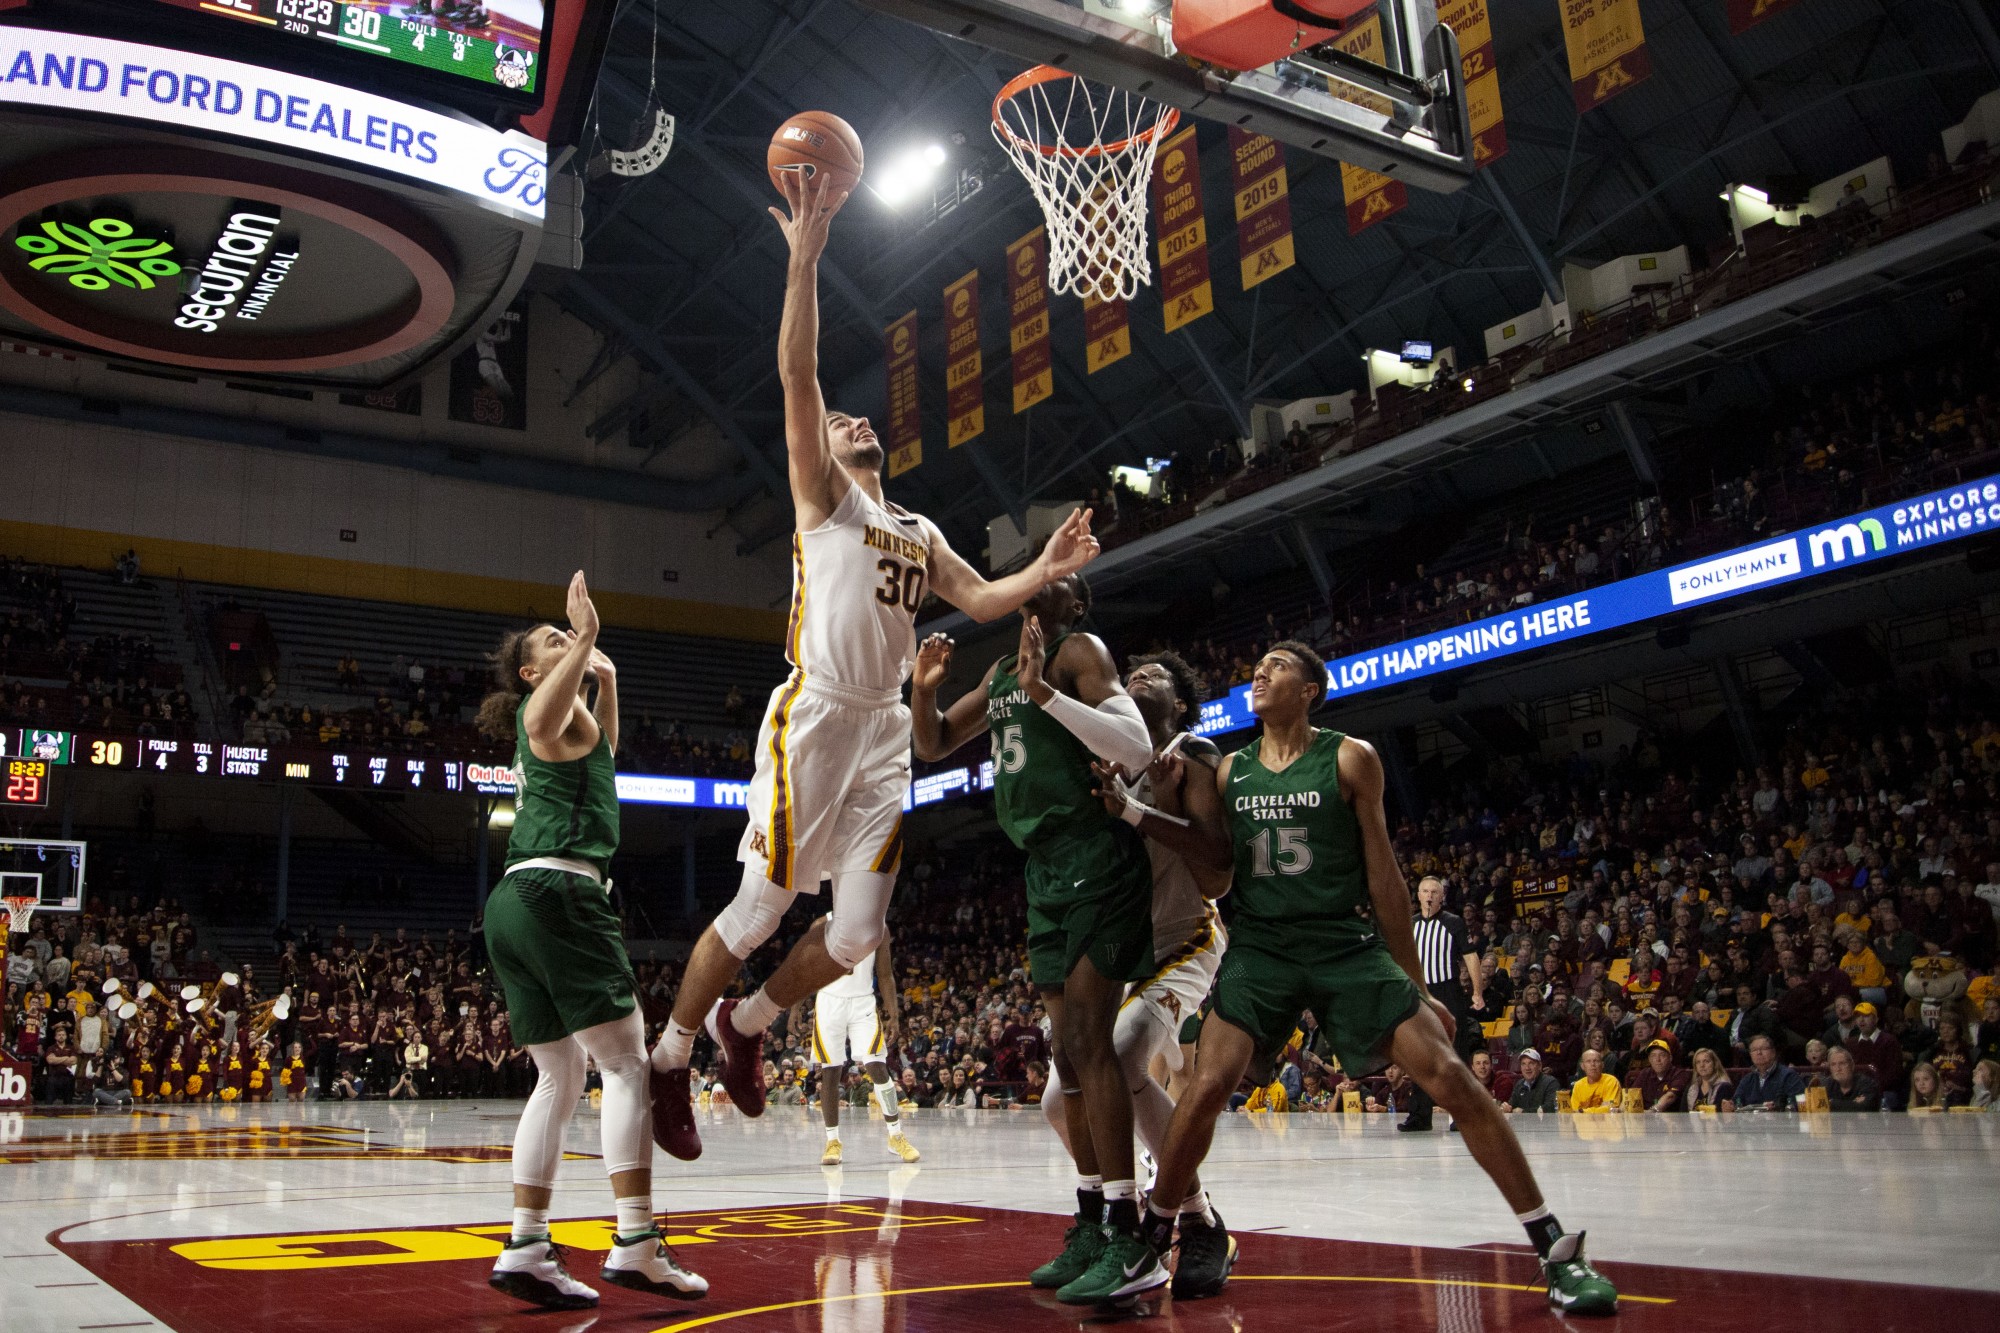 Forward Alihan Demir attempts a layup at Williams Arena on Tuesday, Nov. 5.  The Gophers went on to defeat Cleveland State 85-50. 